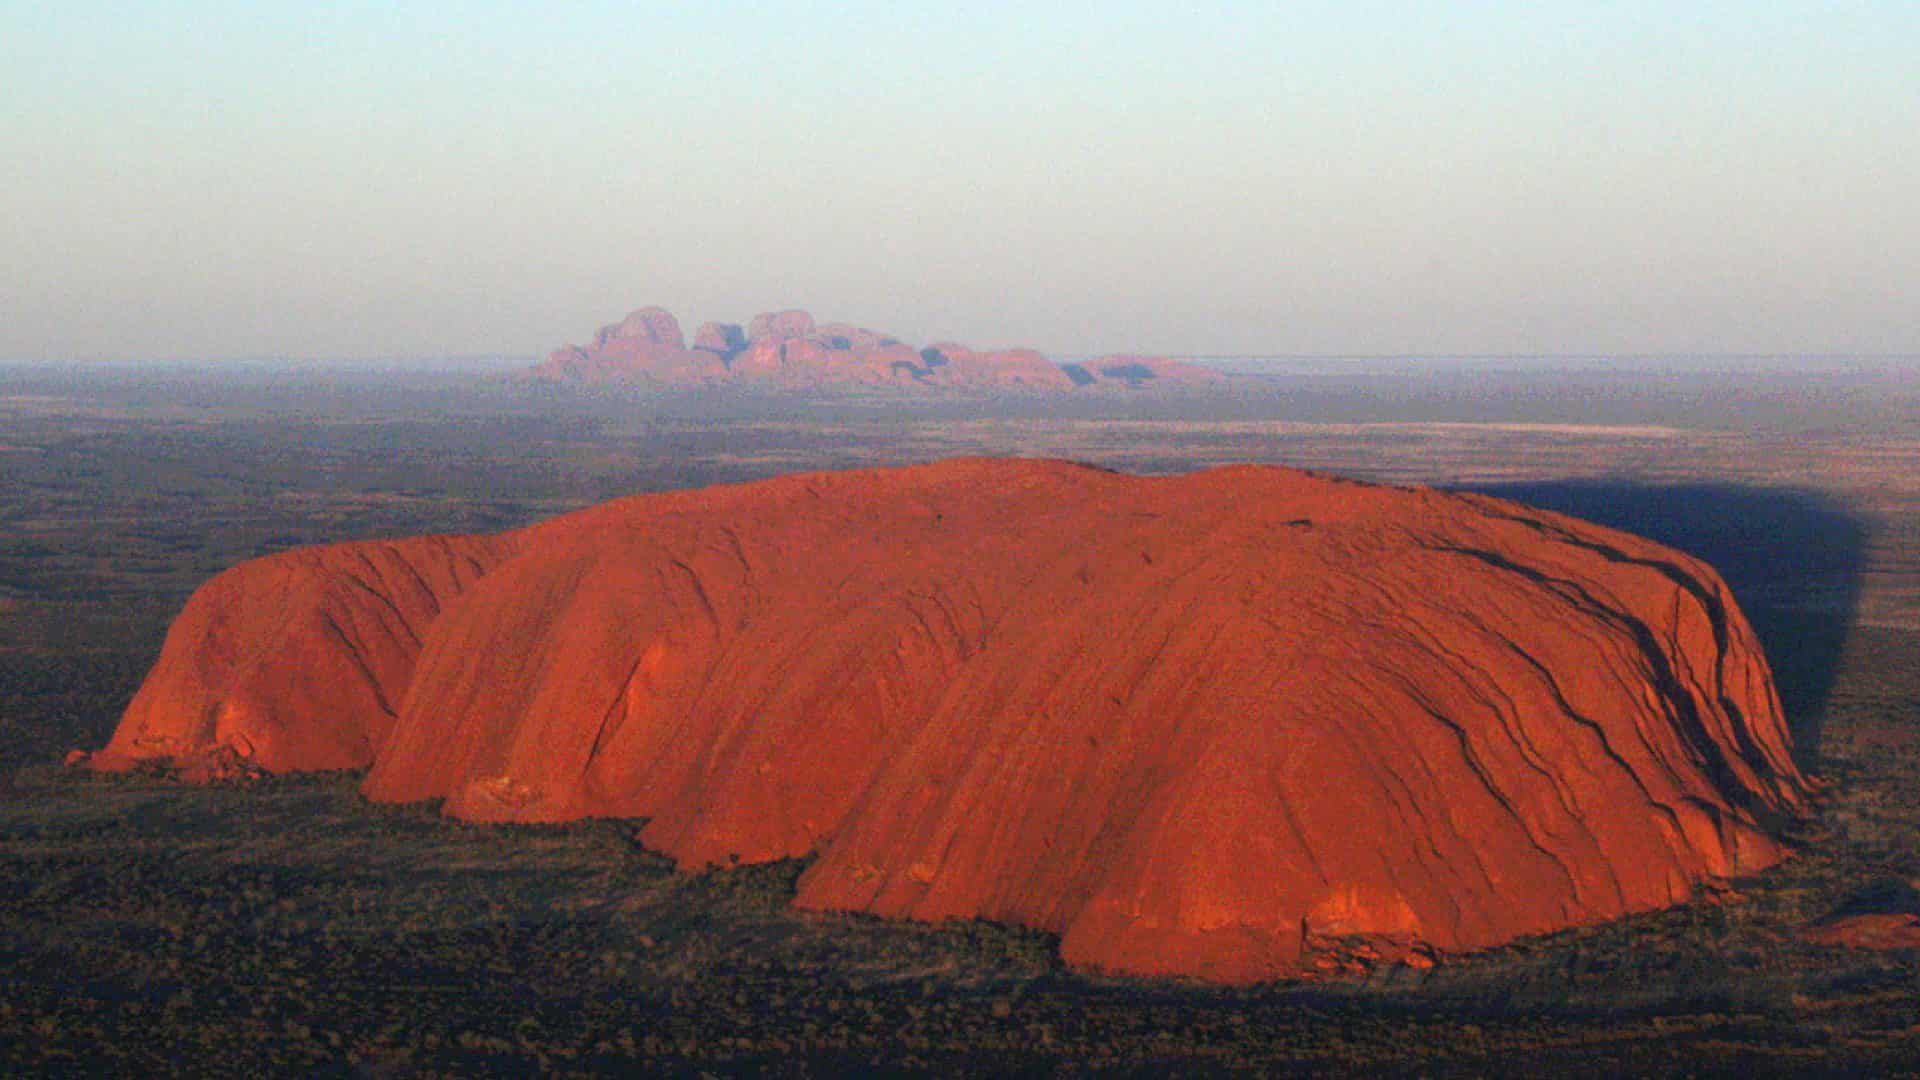 Visit Australia for: The red beauty of Uluru in the Outback seen from the air with Kata Tjuta in the distance